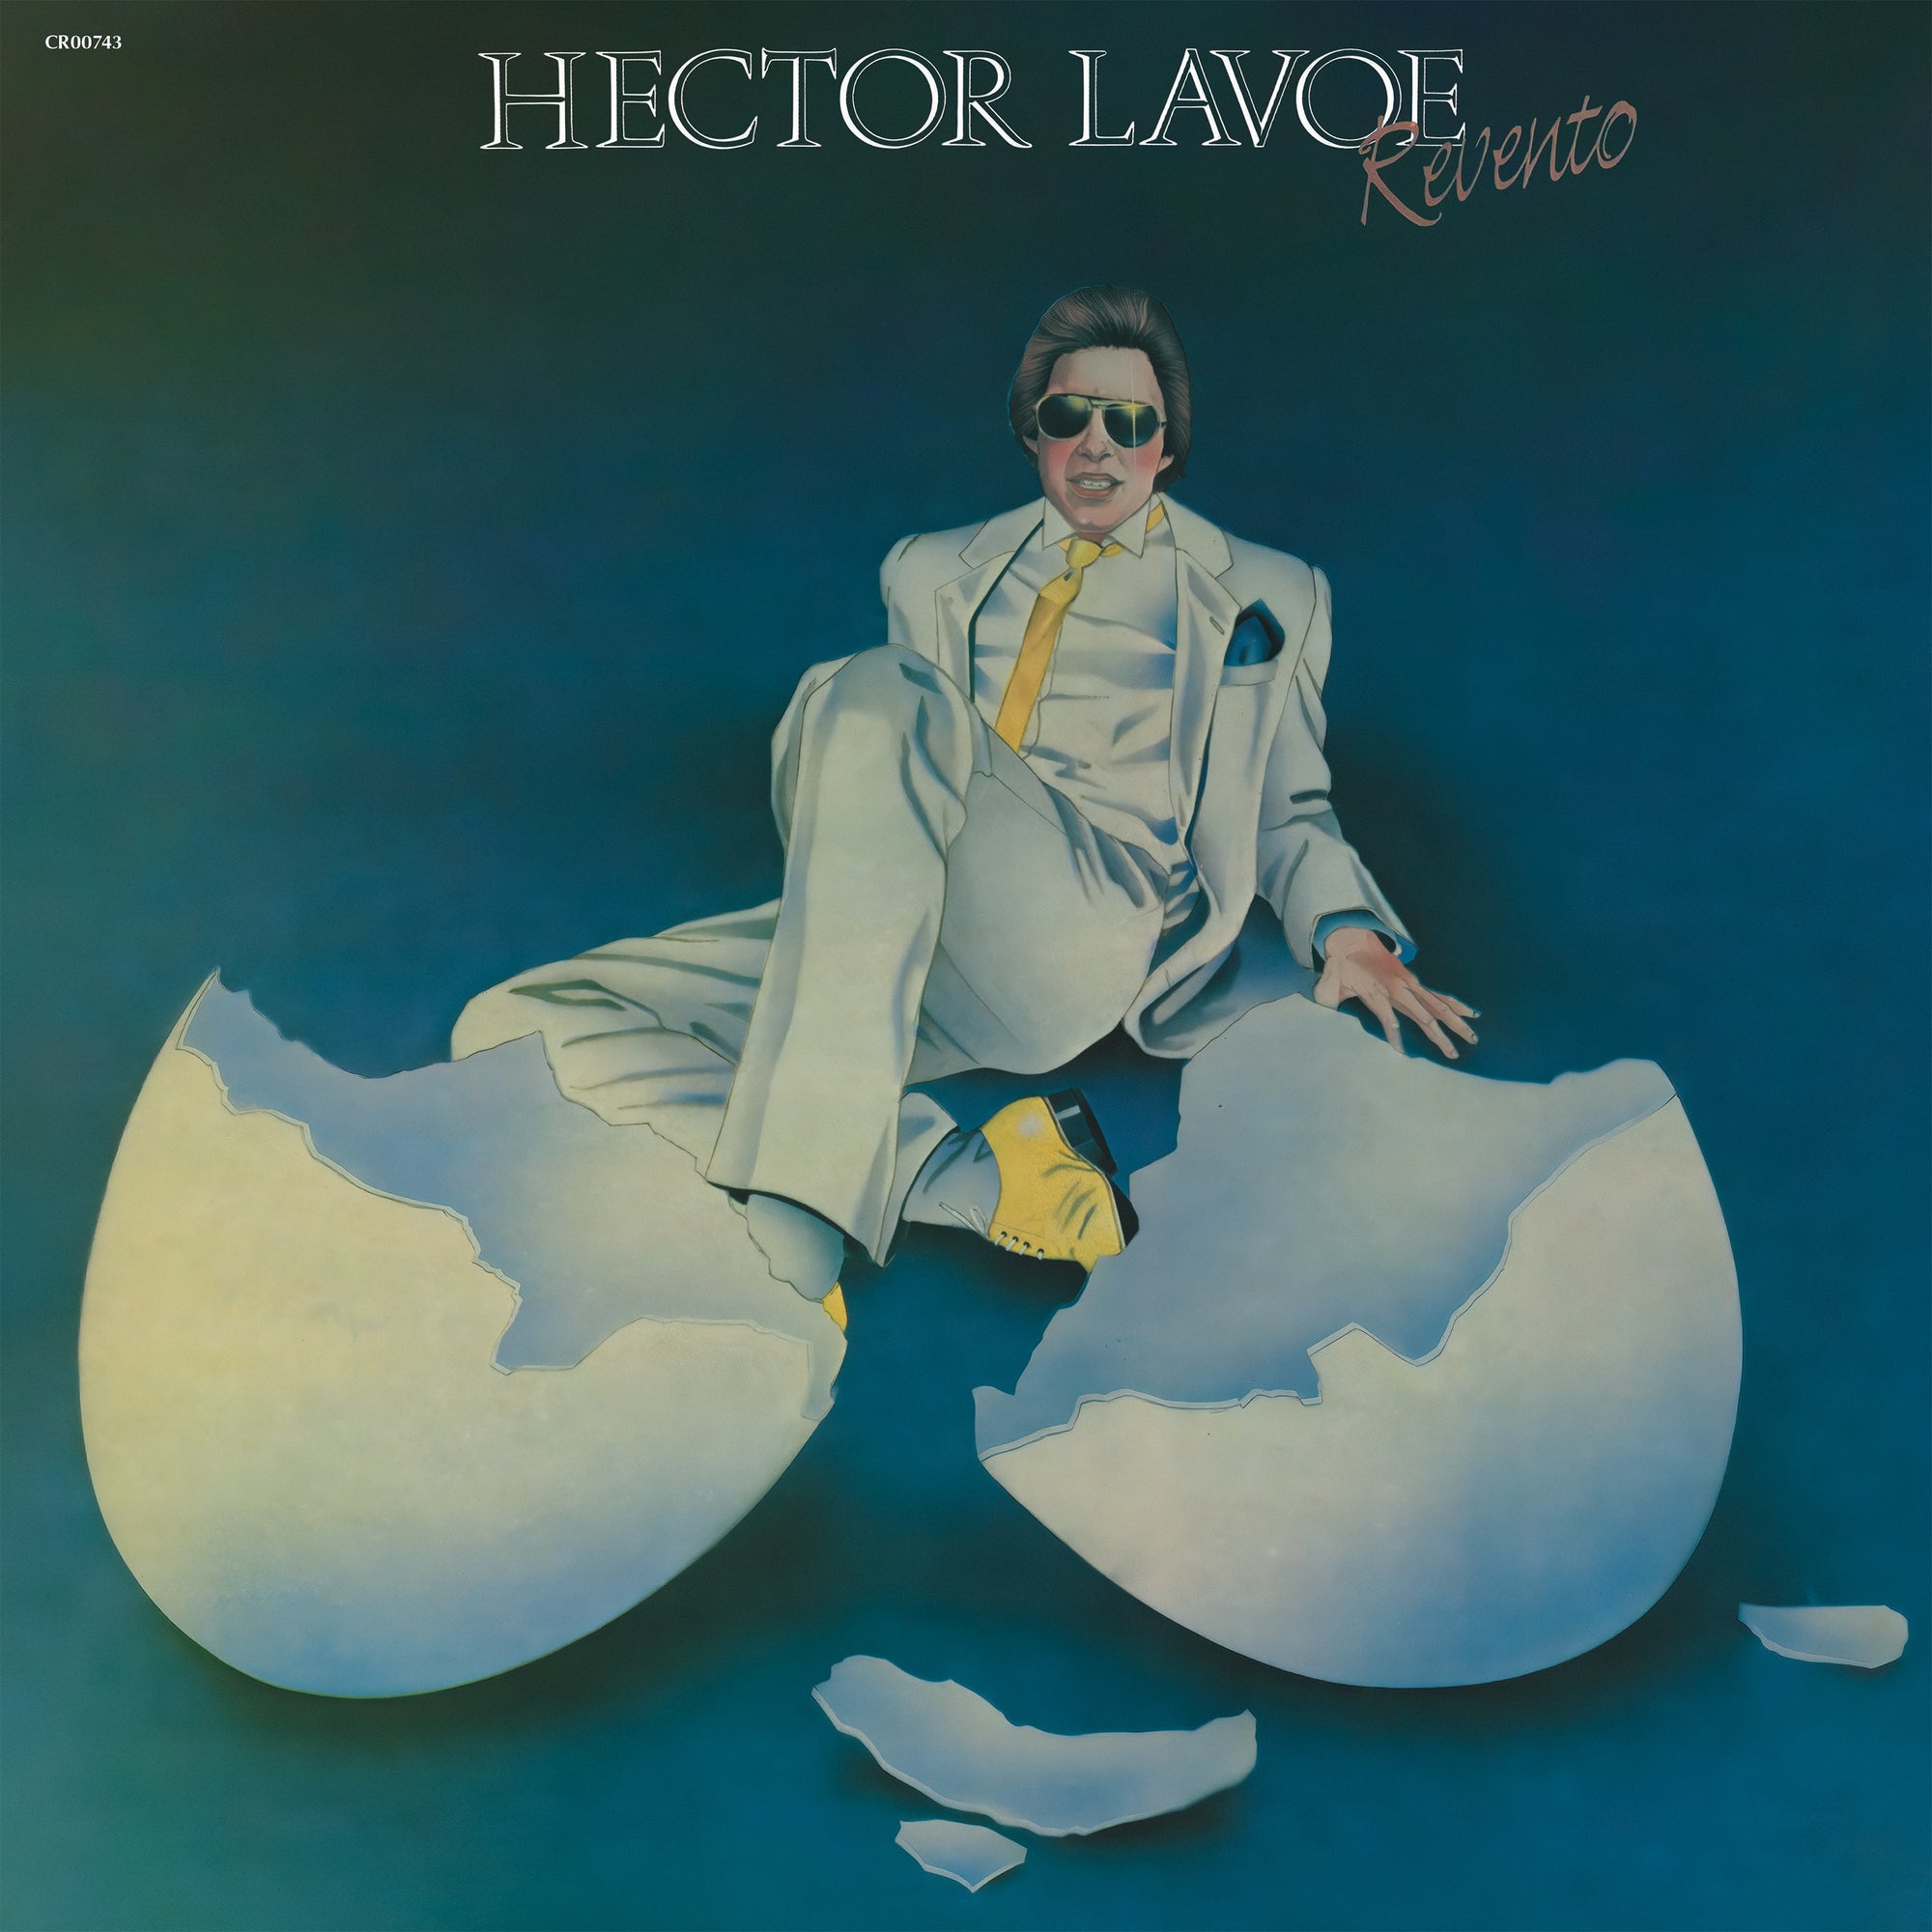 HÉCTOR LAVOE’S BESTSELLING CLASSIC, REVENTÓ, REISSUED THROUGH FANIA RECORDS' 60TH ANNIVERSARY SERIES